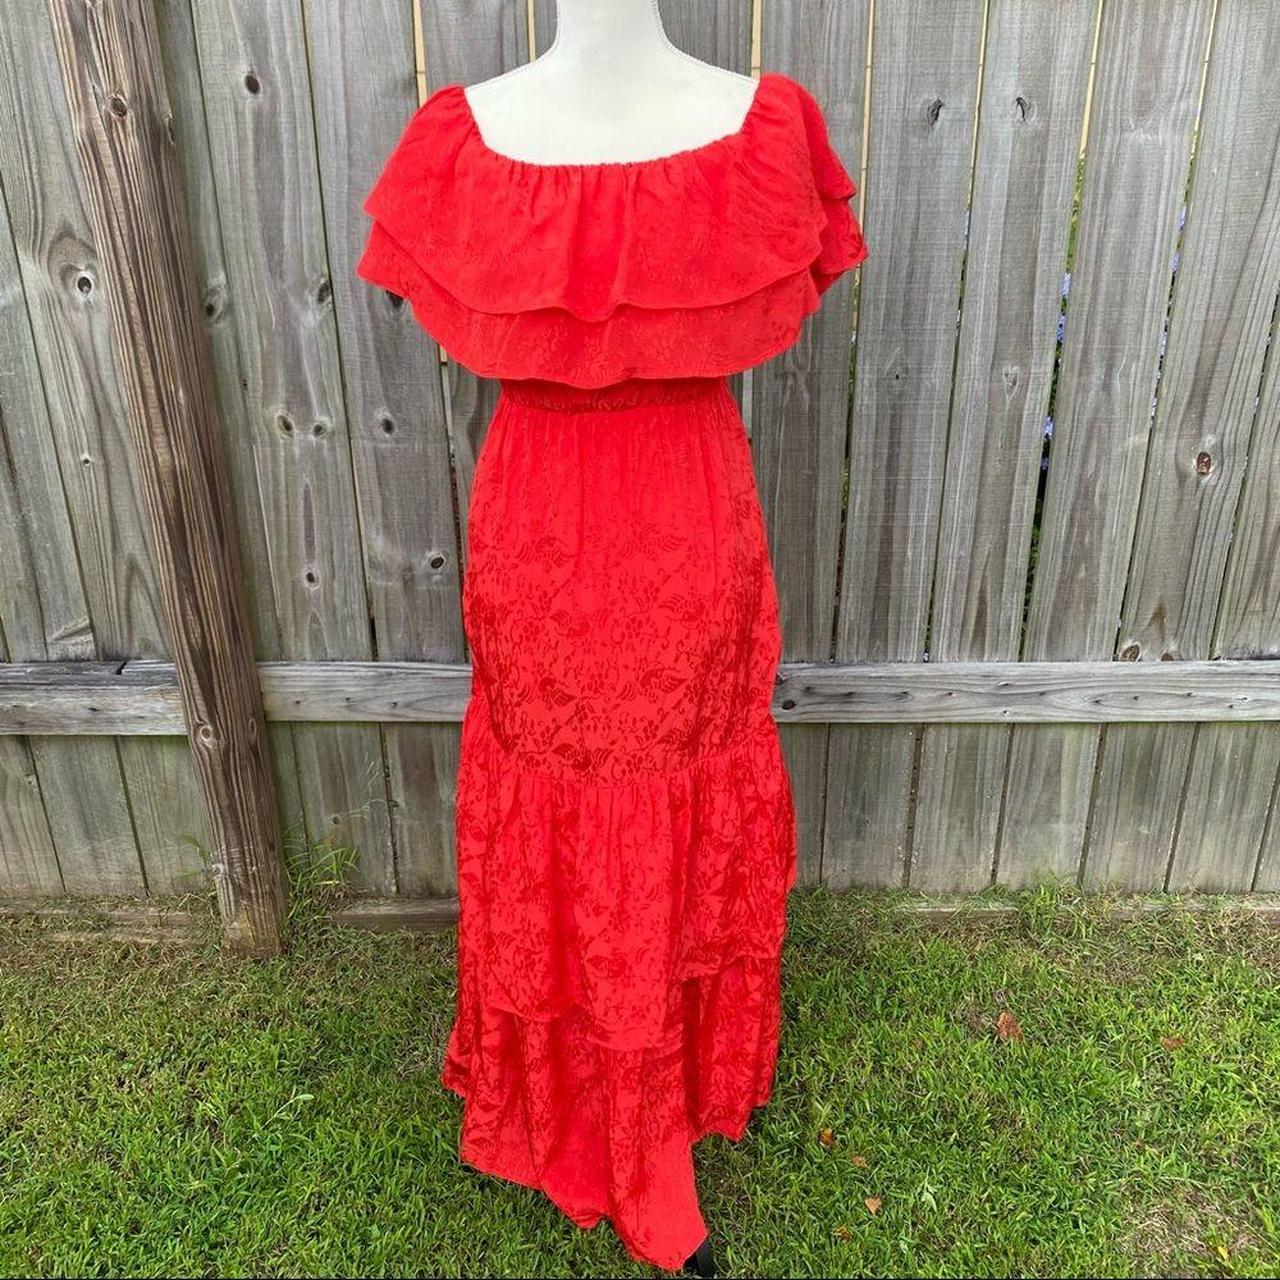 Product Image 2 - Miriana Dress in Bright Red
Gorgeous